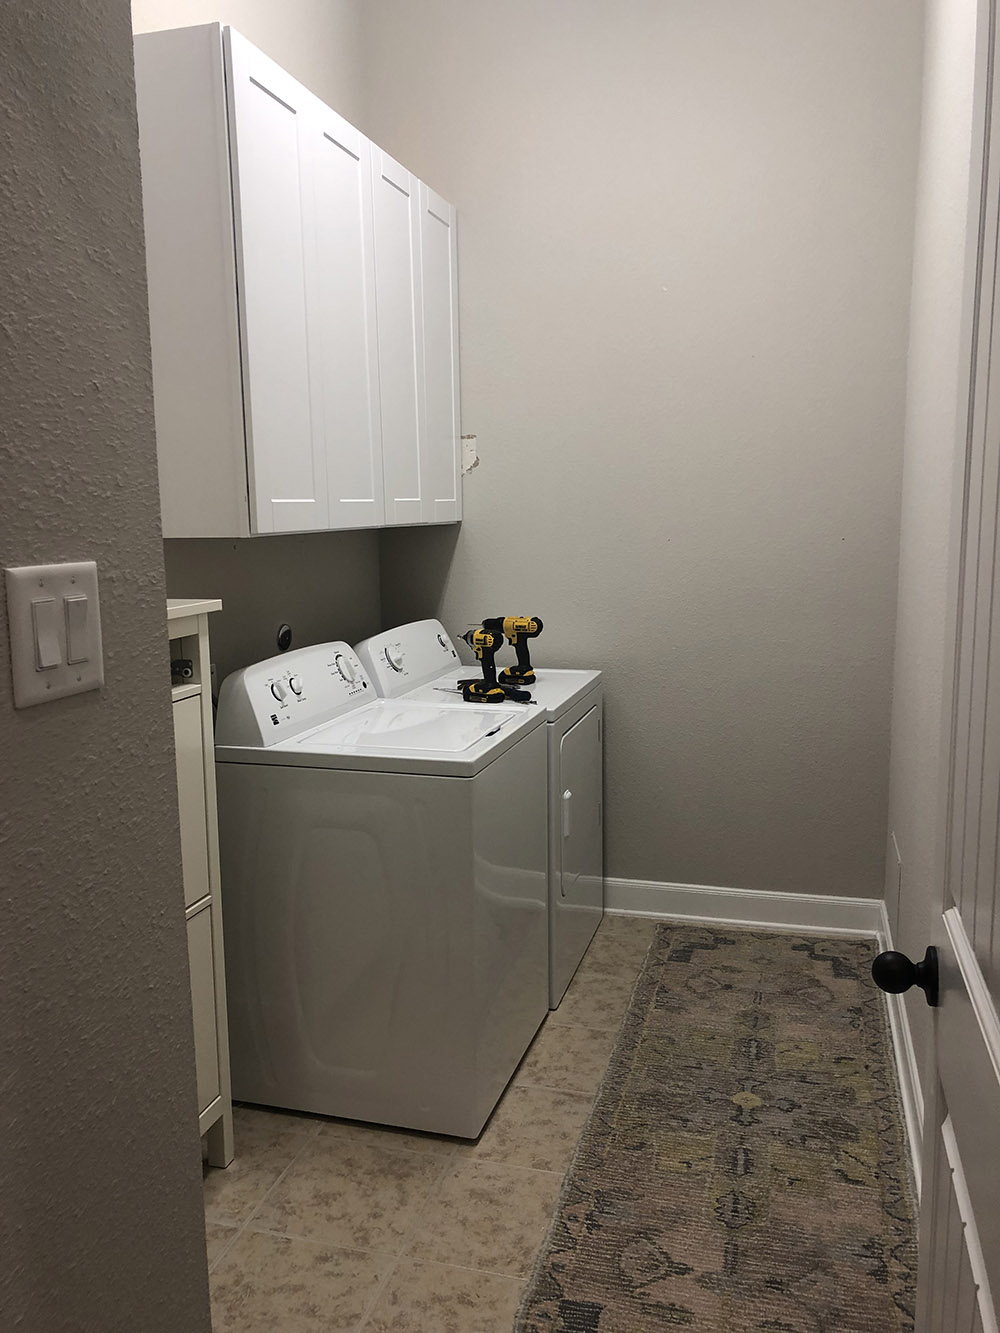 A pair of white cabinets mounted on a wall above a washer and dryer.